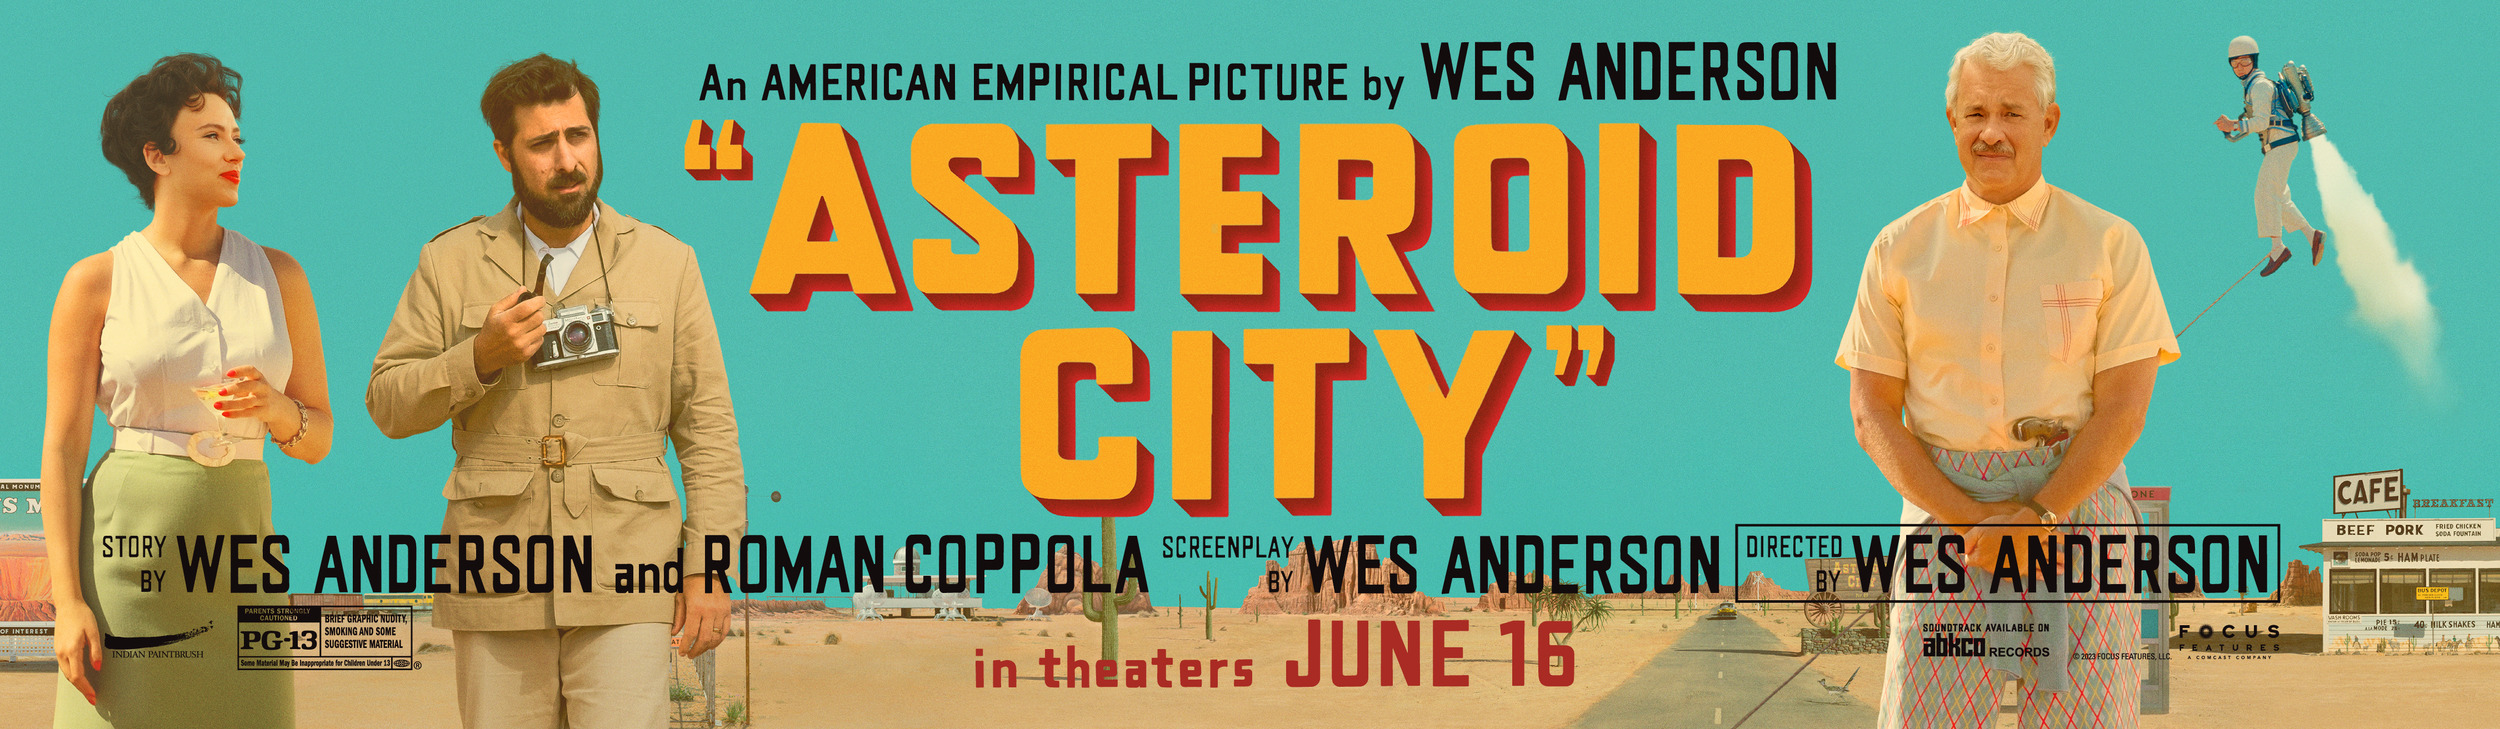 Mega Sized Movie Poster Image for Asteroid City (#7 of 20)